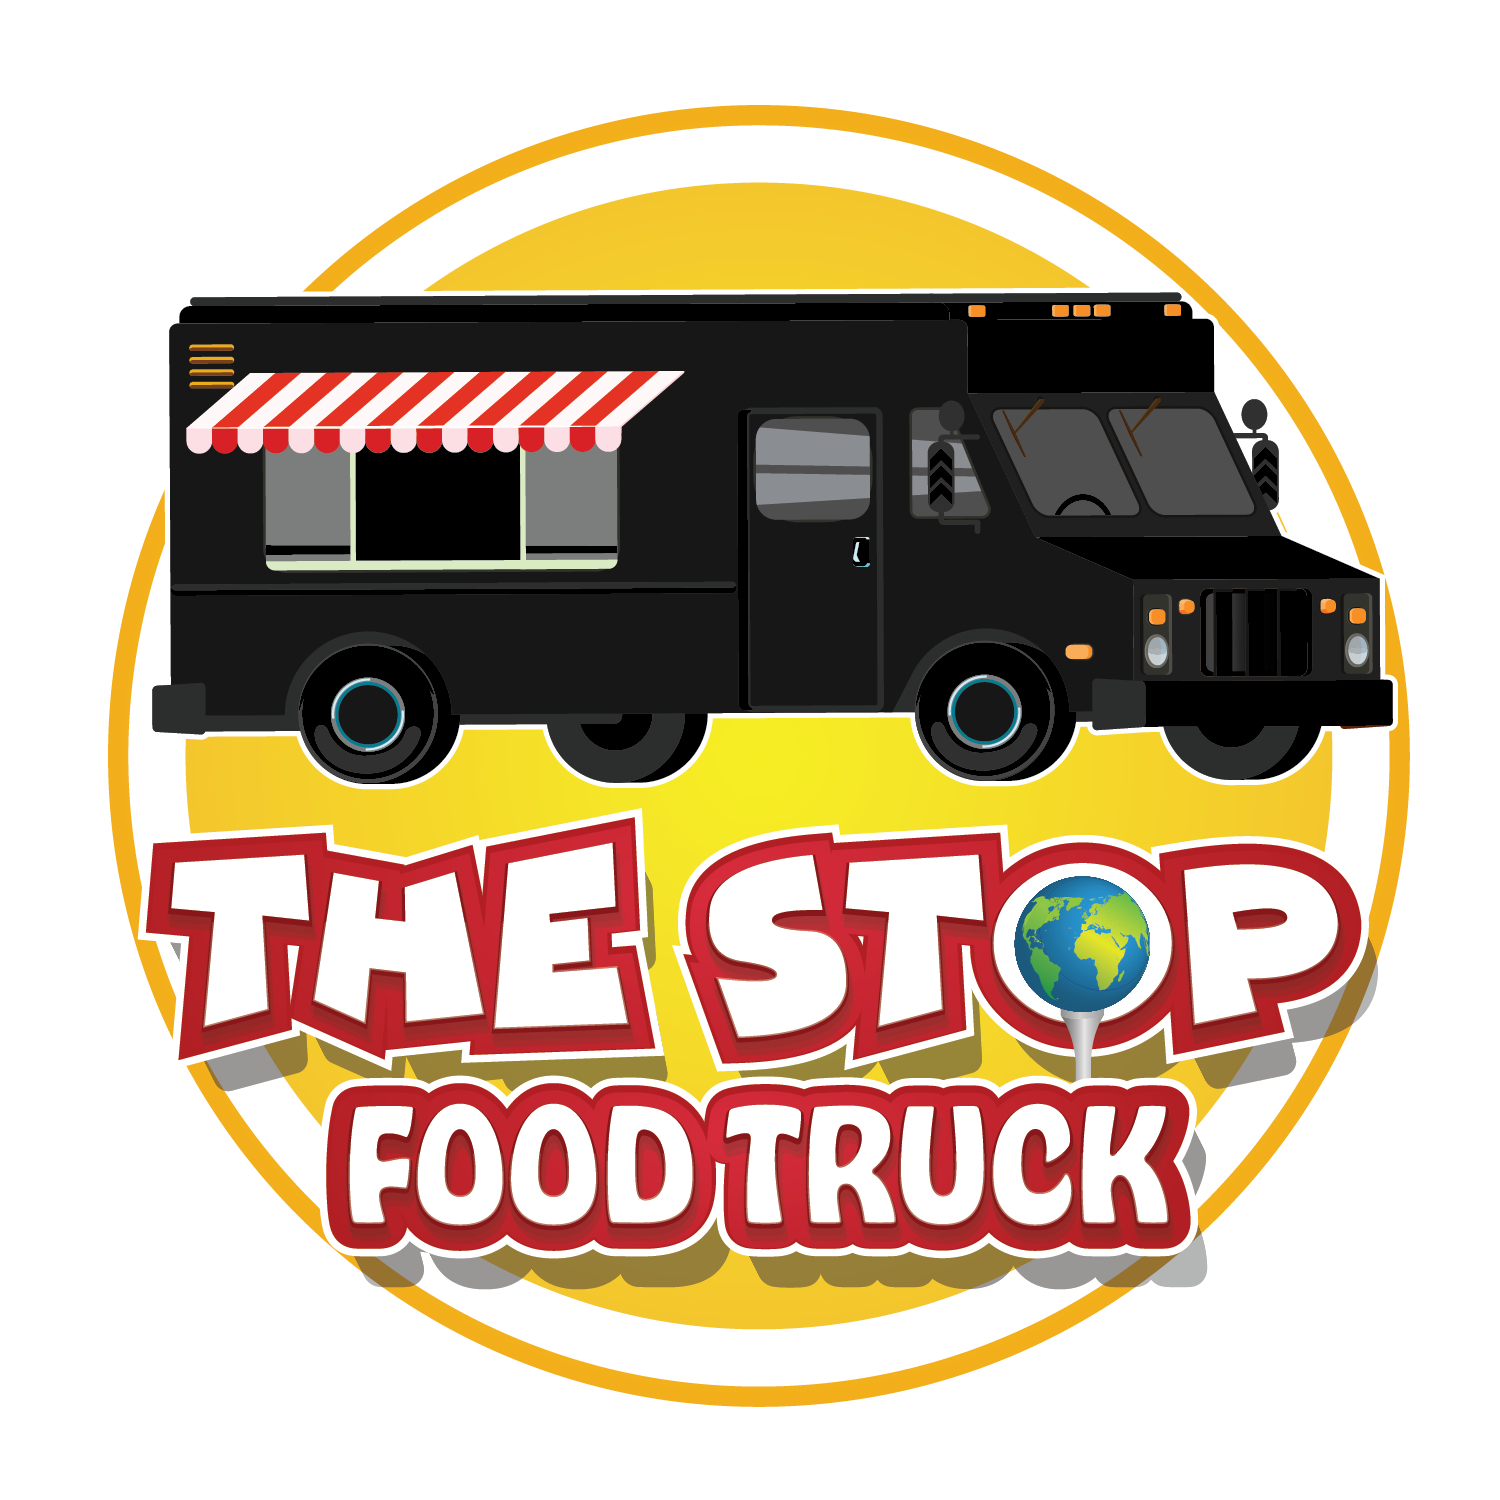 The Stop Food Truck